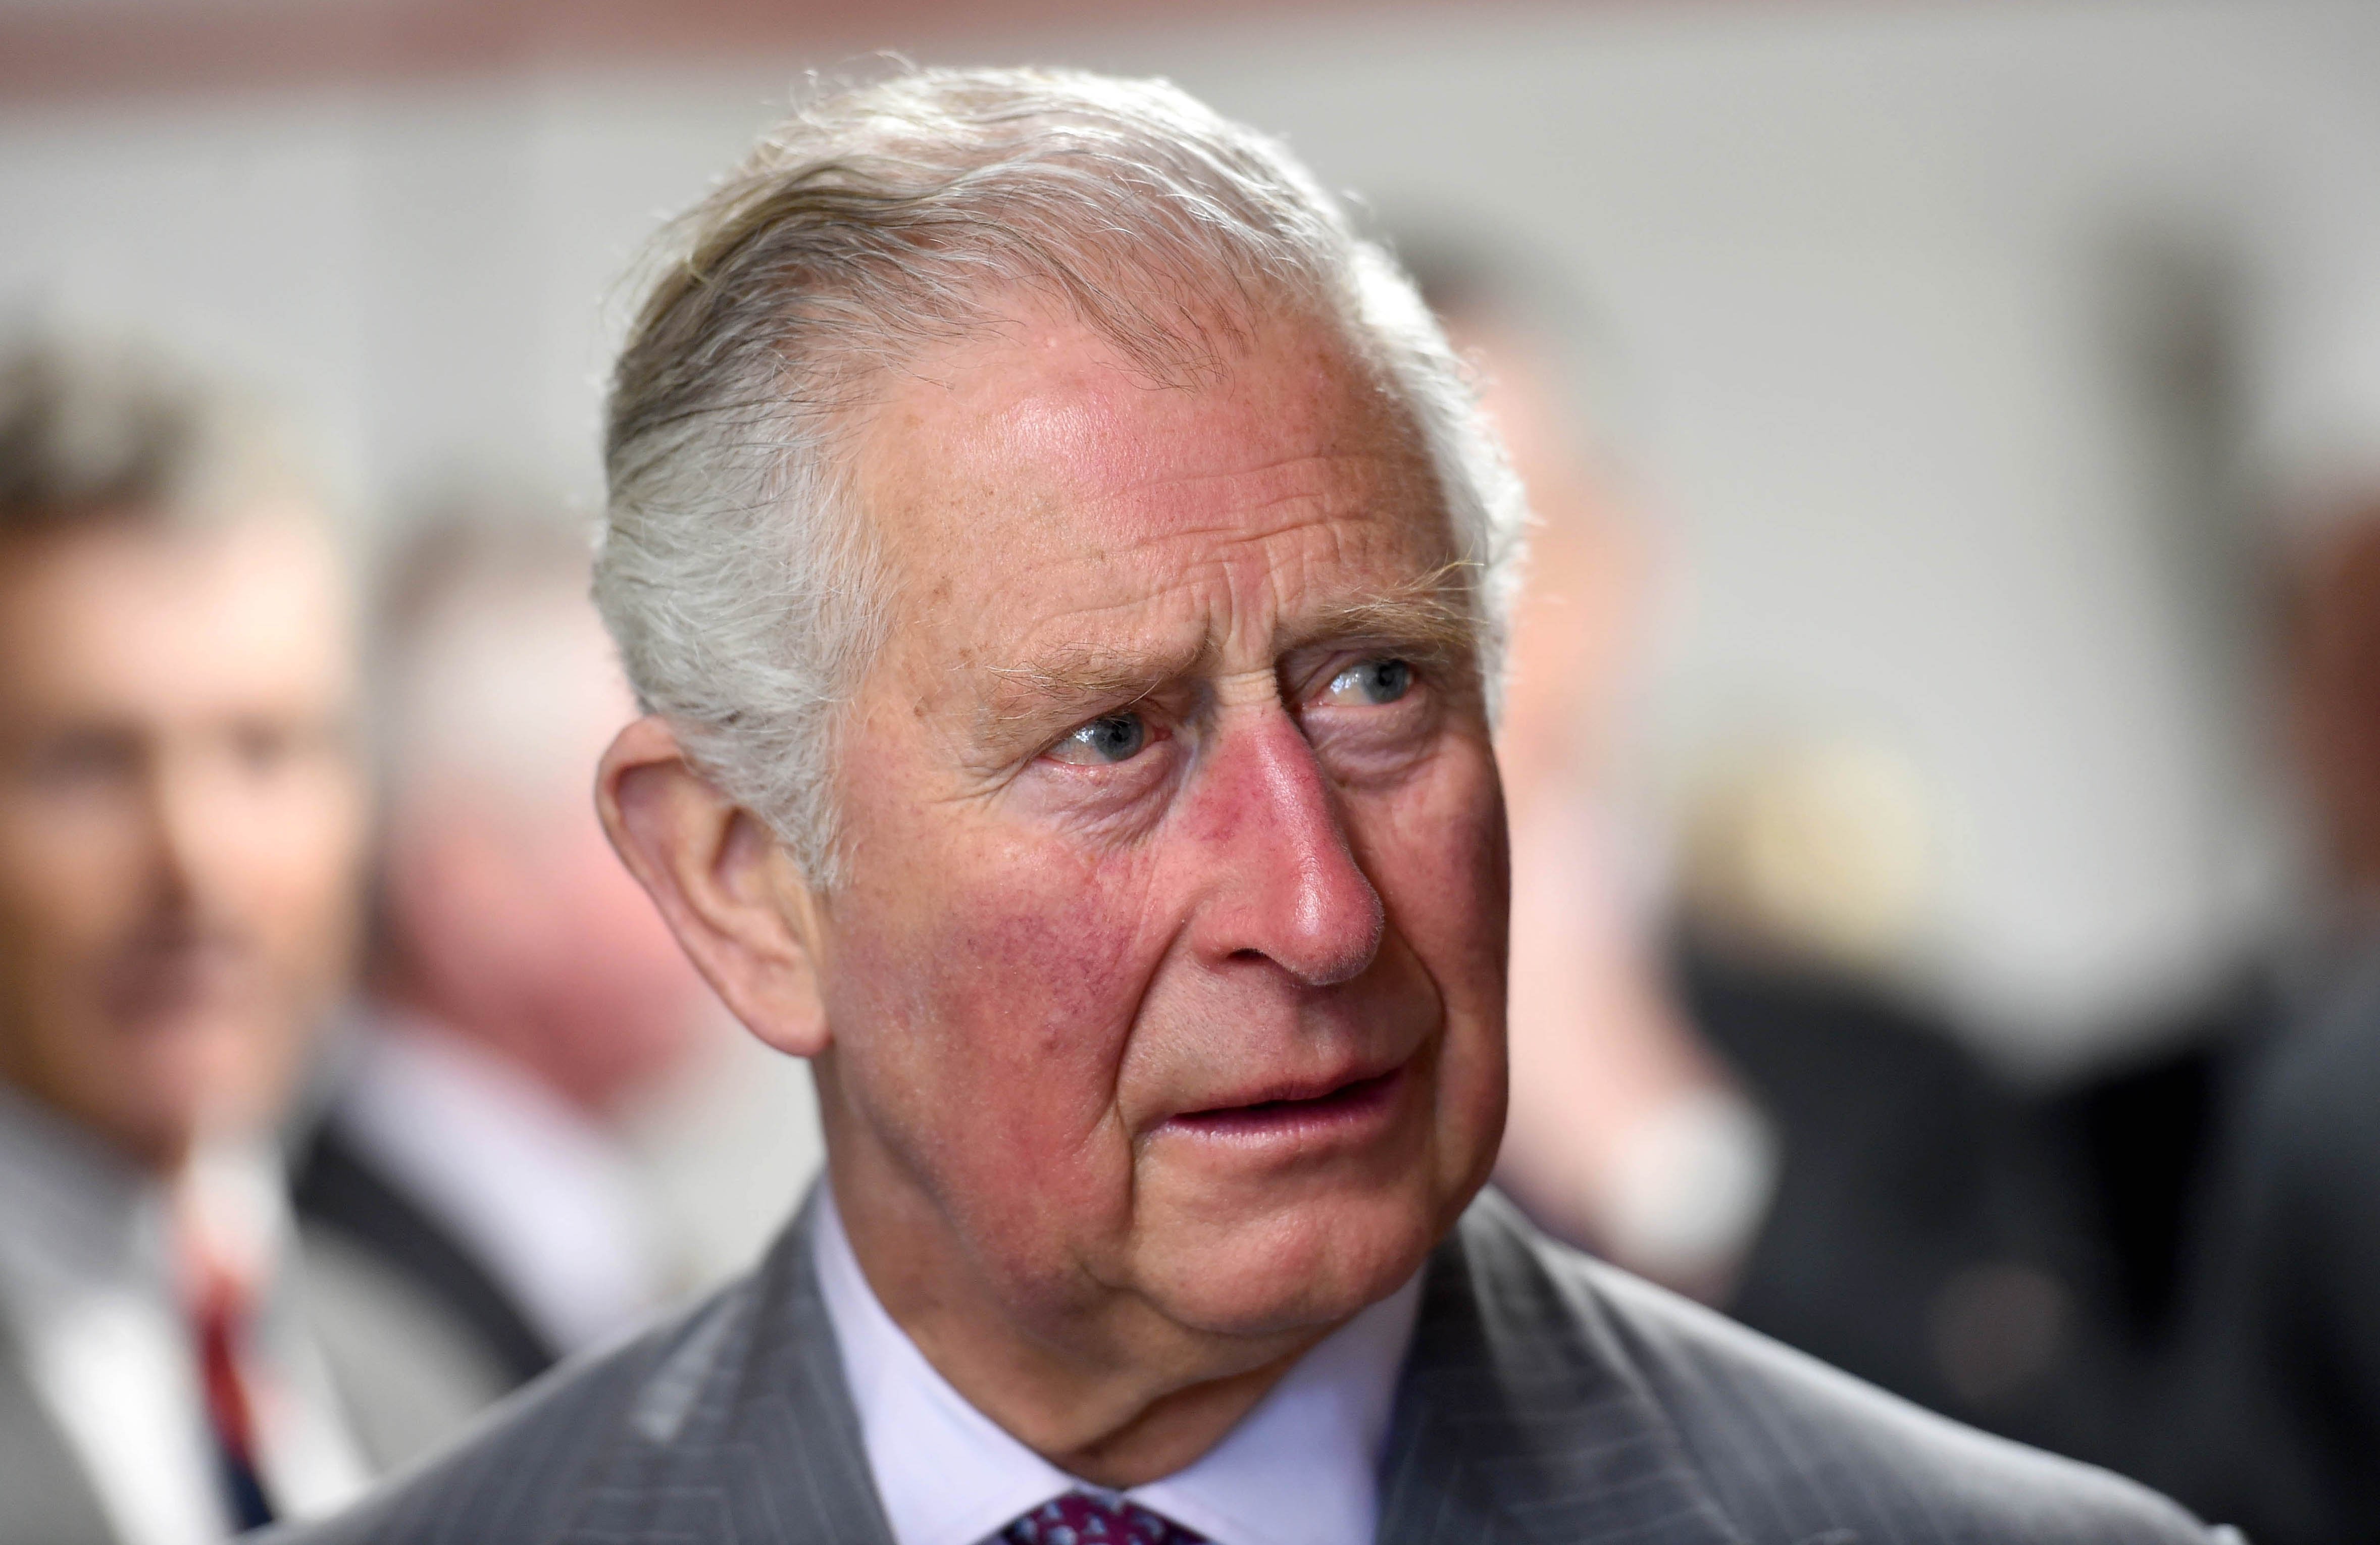 Prince Charles (Now King) makes an official visit to St Austell Brewery on April 05, 2019 in St Austell, England. | Source: Getty Images